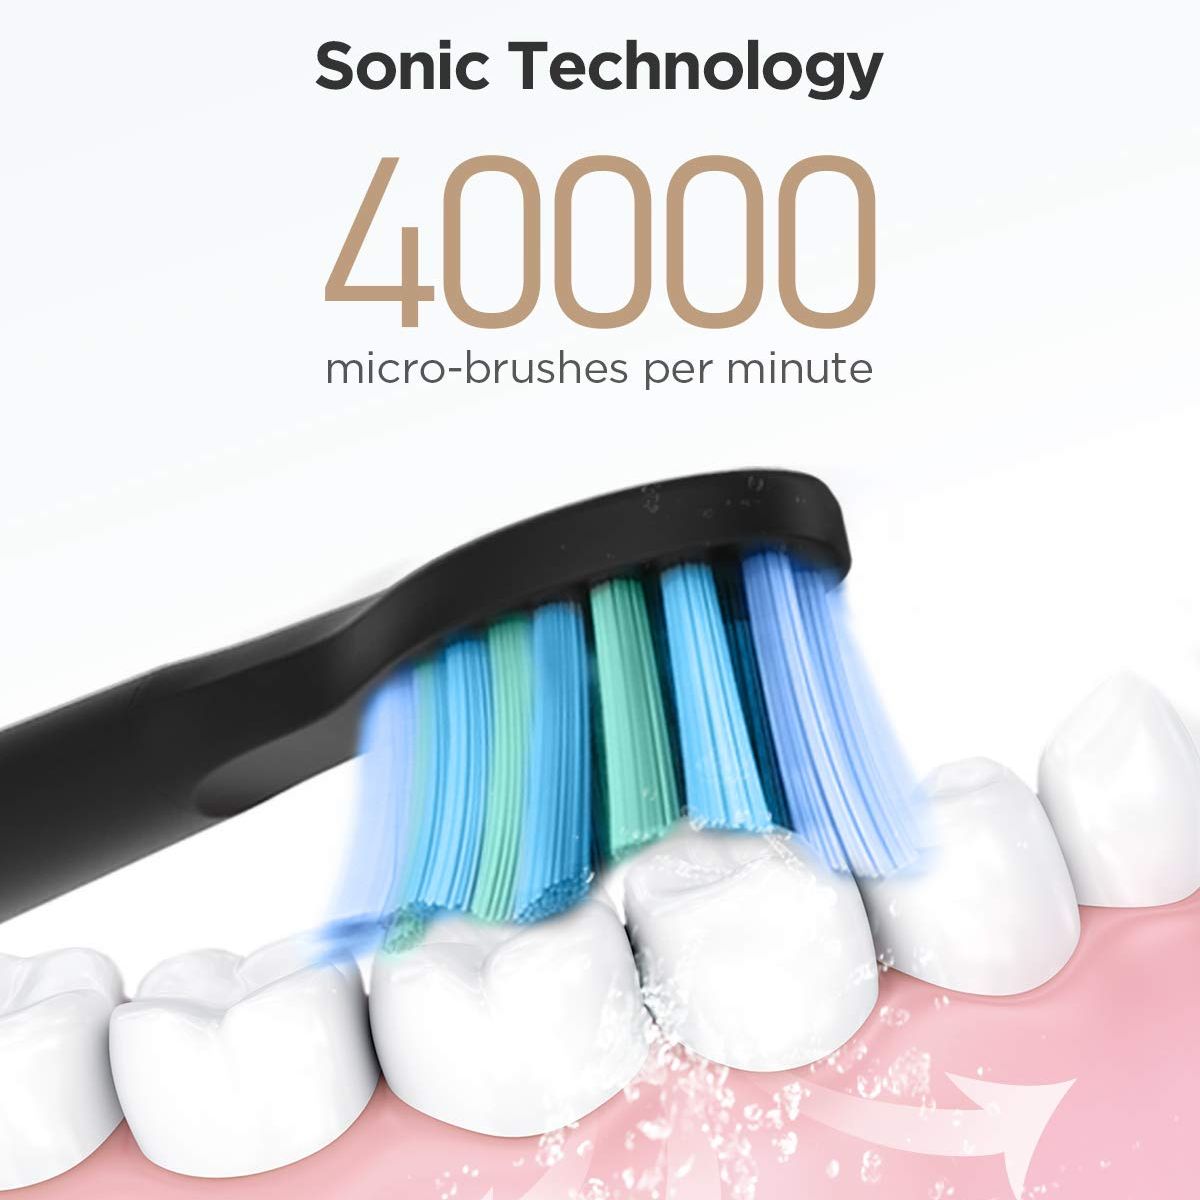 Fairywill FW507 Sonic Electric Toothbrushes for Adults Kids 5 Modes Smart Timer Rechargeable 8 Super Whitening Toothbrush Heads